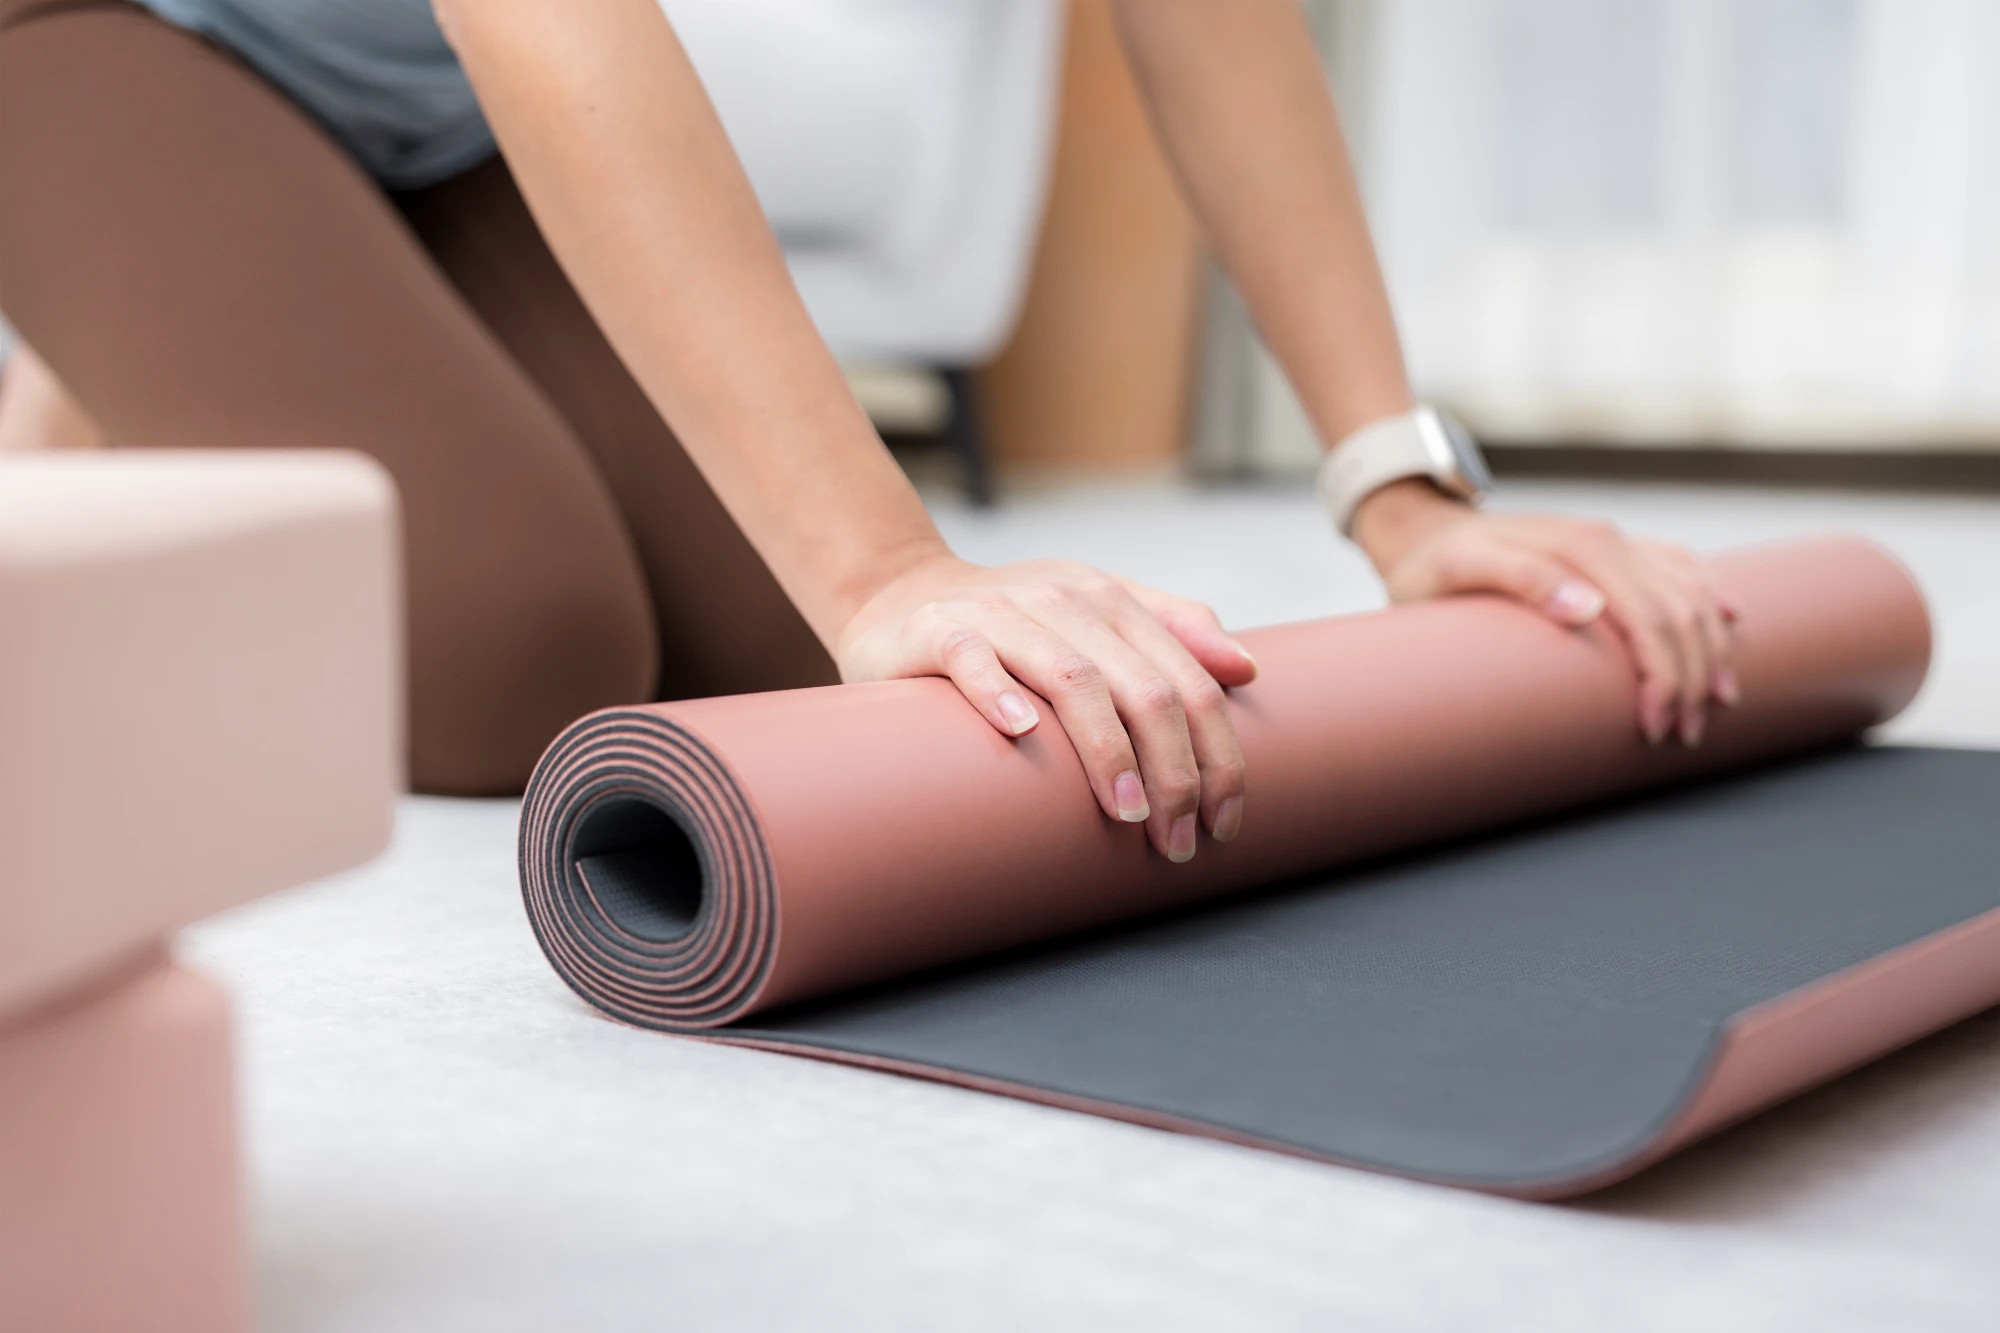 nathaly-hand-roll-up-yoga-mat-at-home